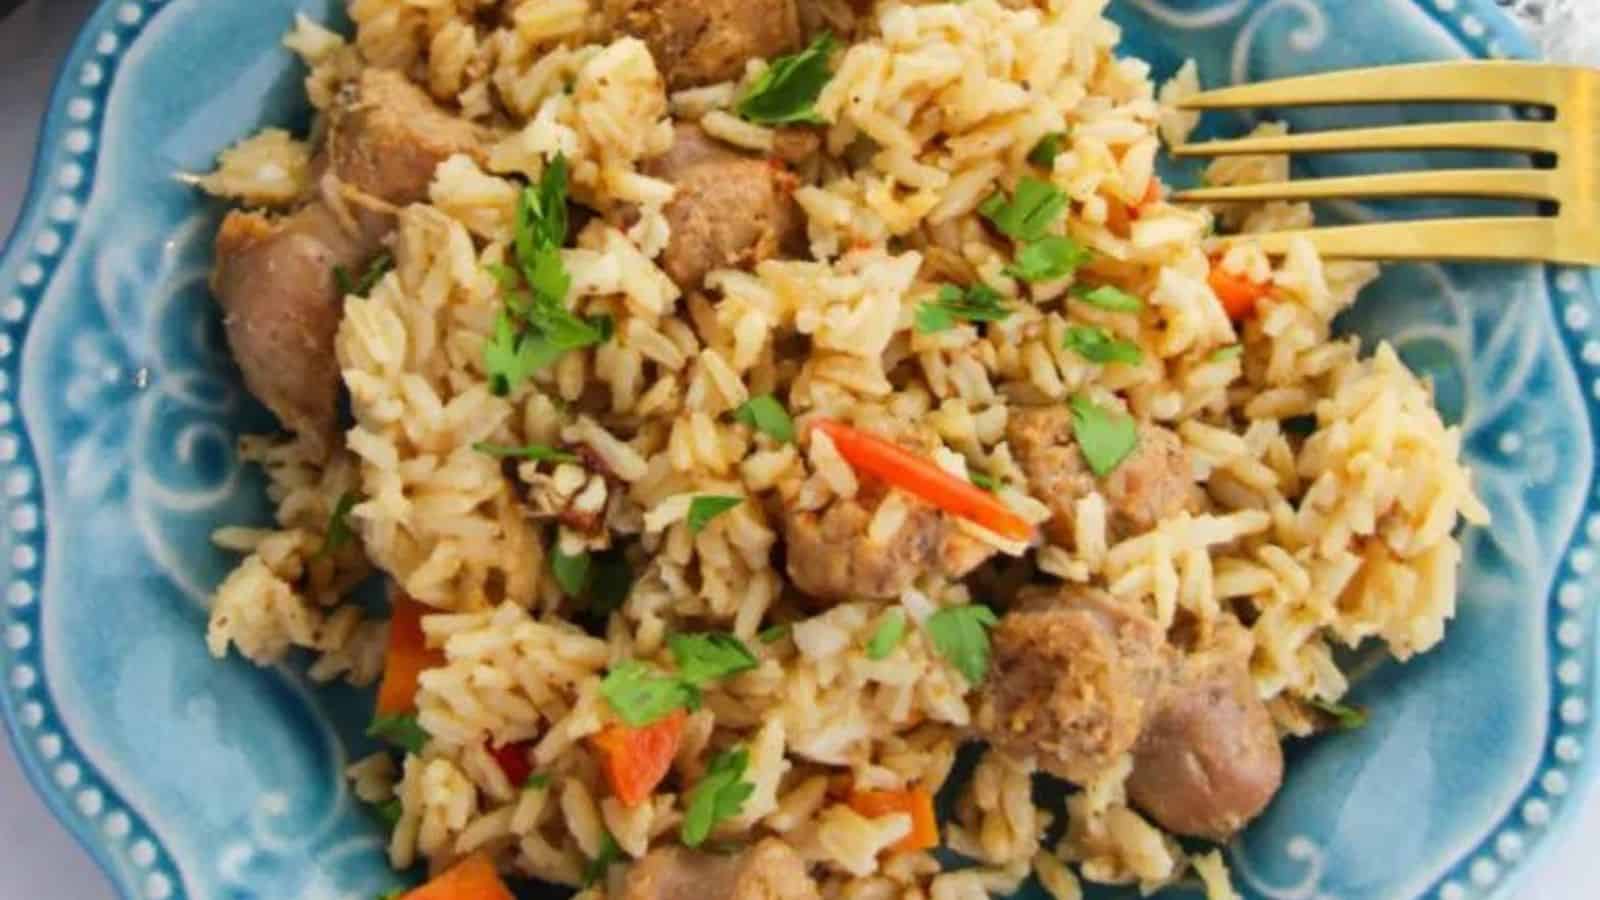 Close up of Cajun Rice and Sausage on a plate.